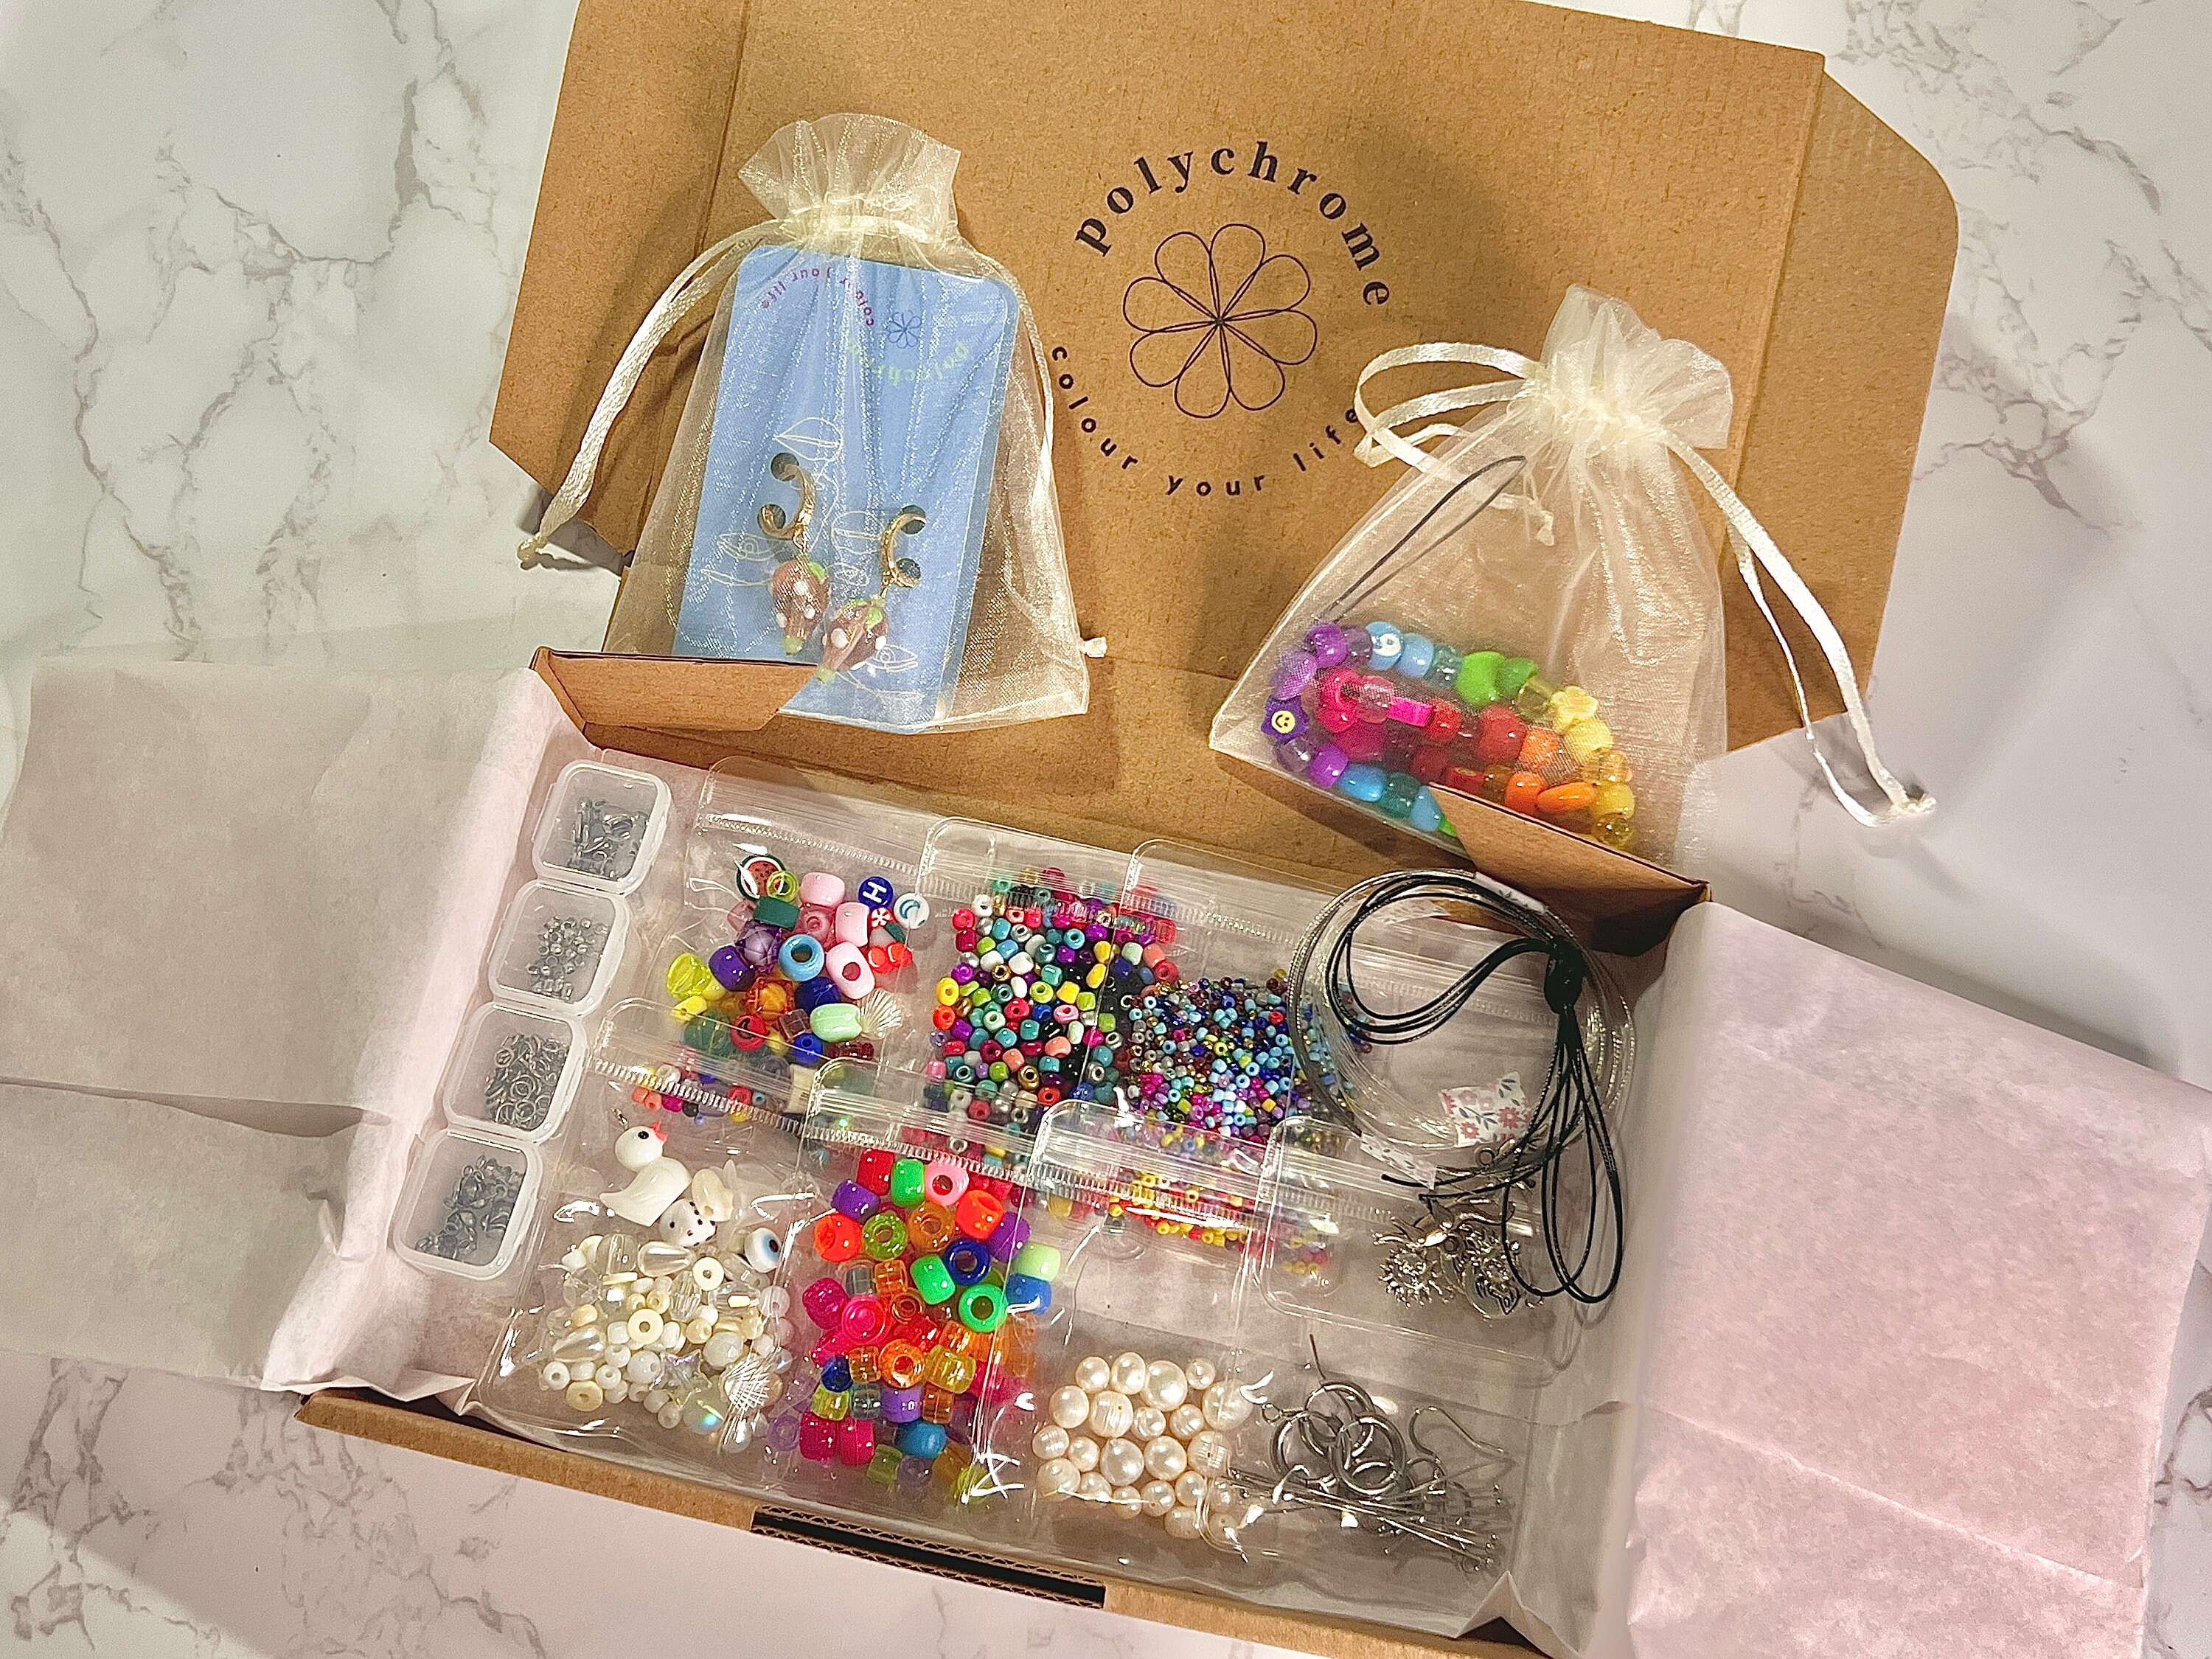 A box overflowing with a jumble of colorful beads in various shapes and sizes and some threads